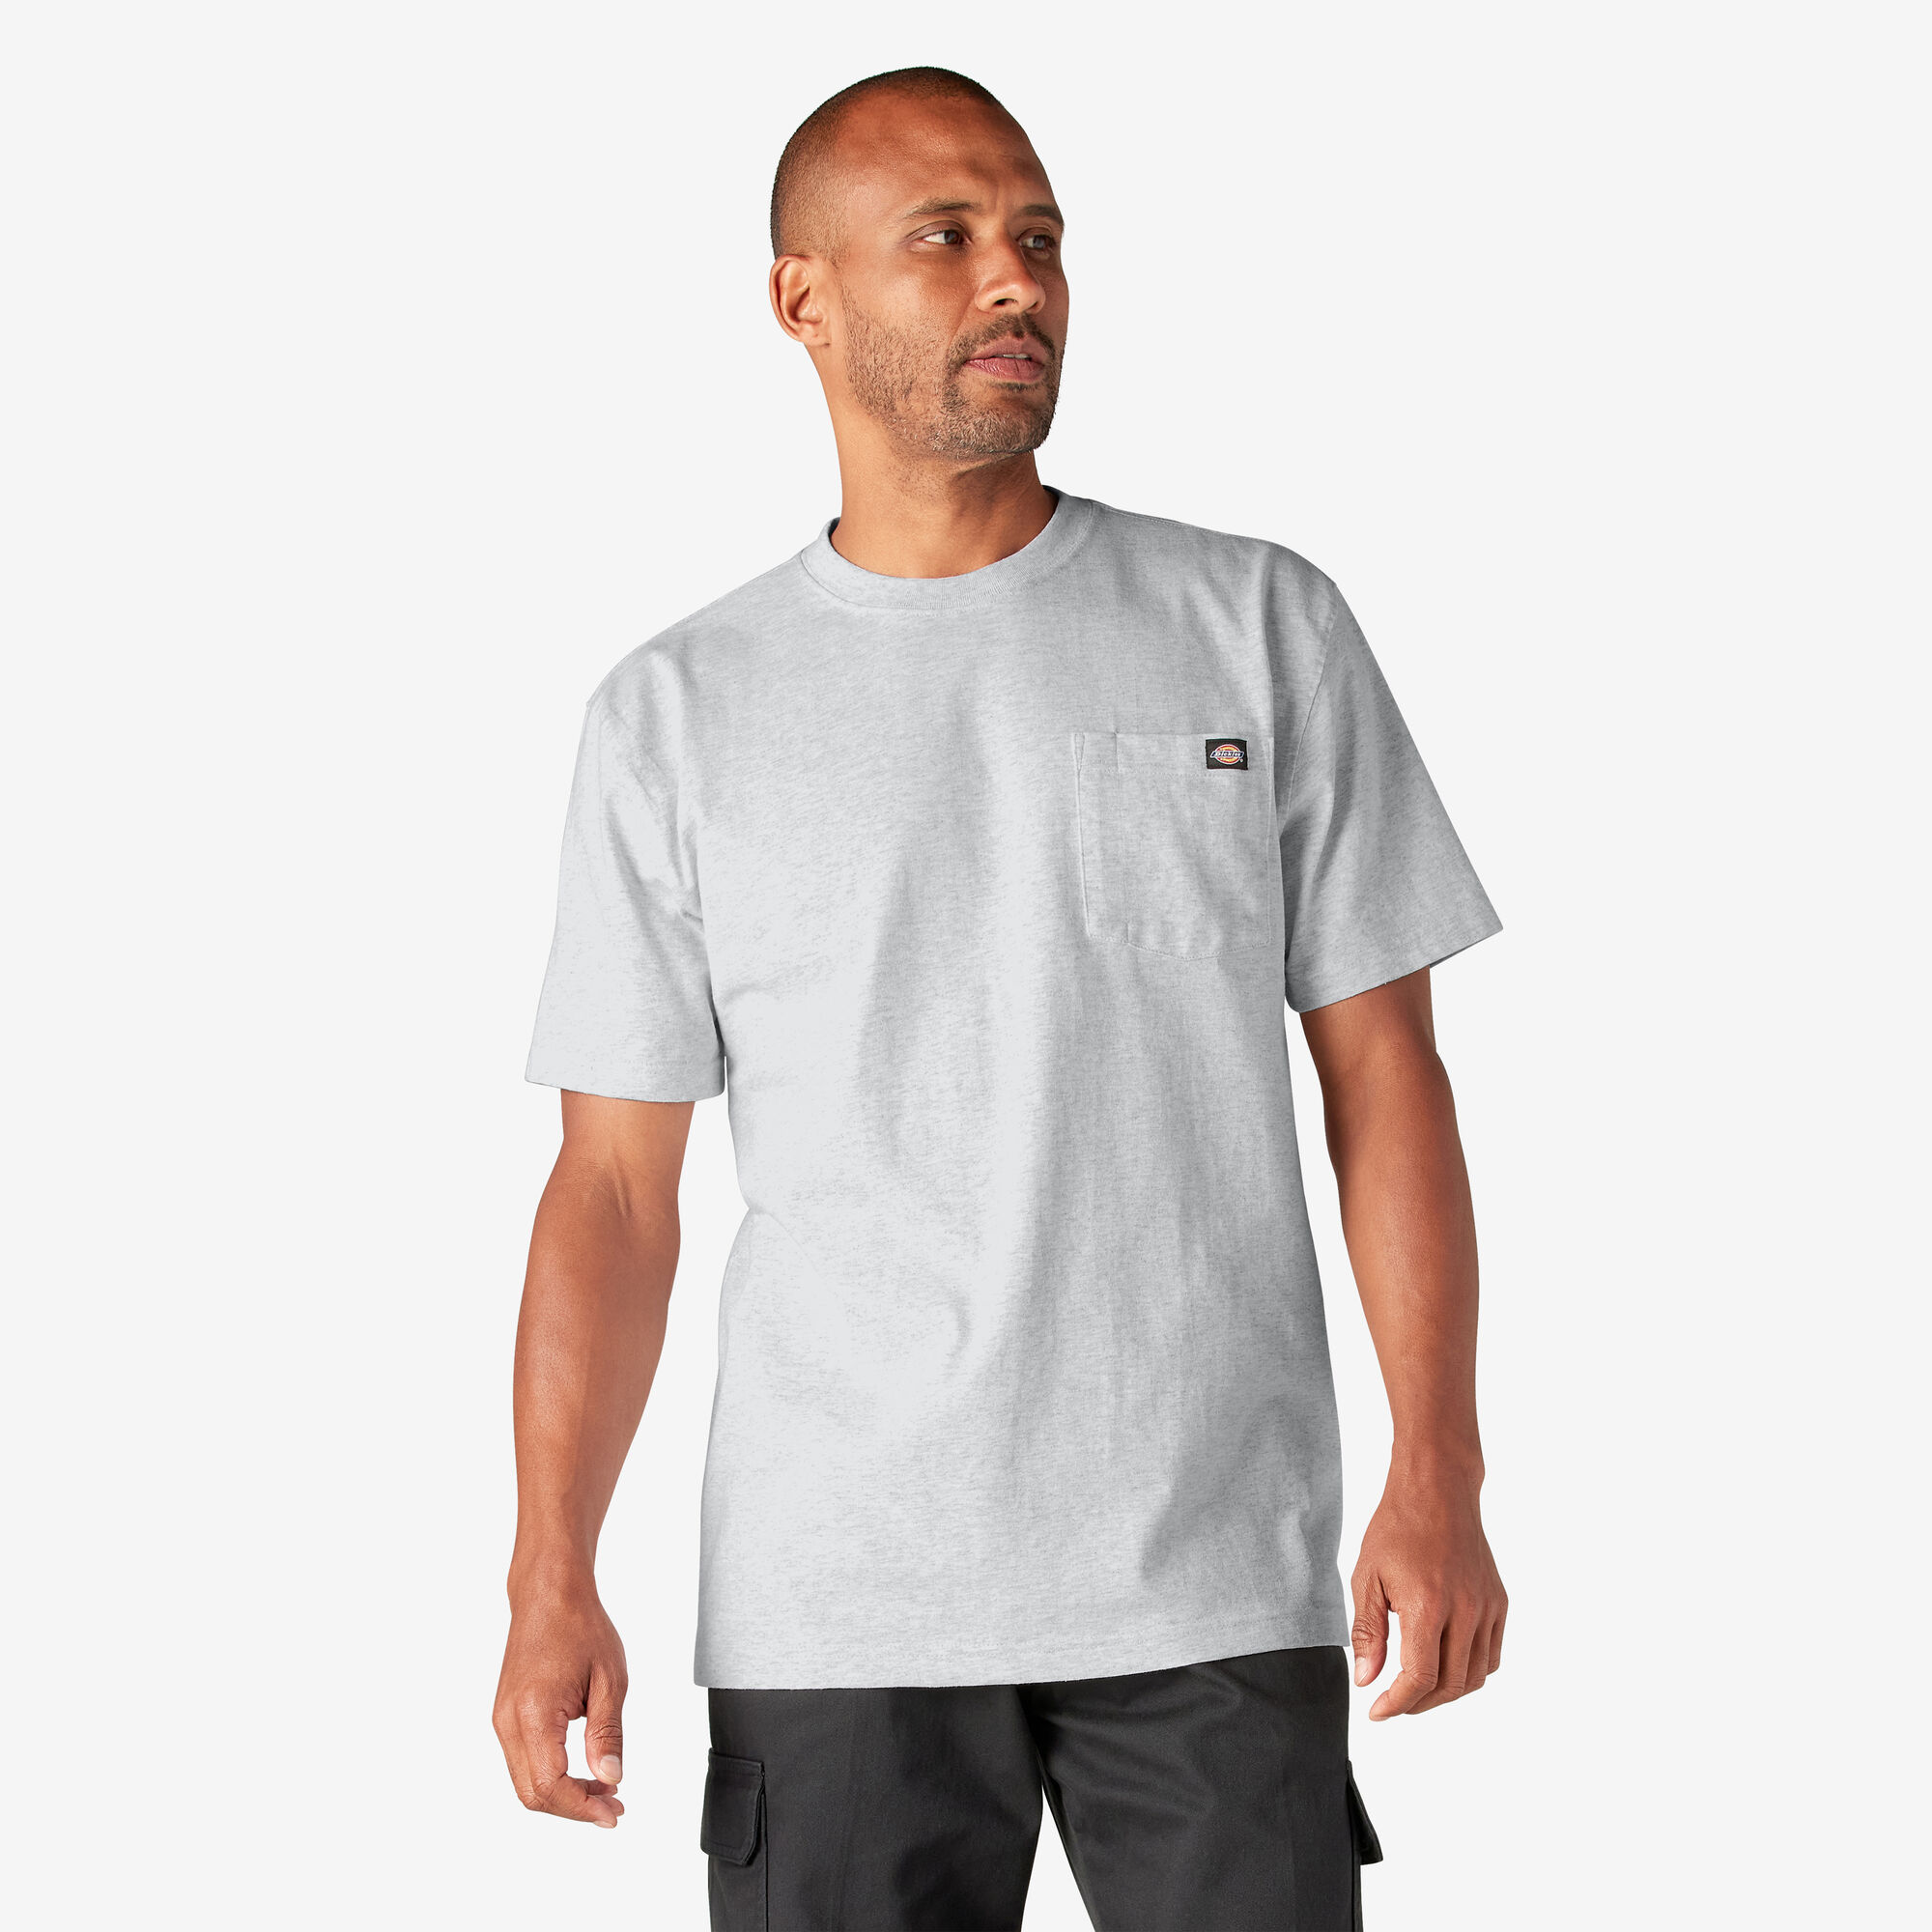 Los Angeles Apparel | Shirt for Men in Ash, Size Small